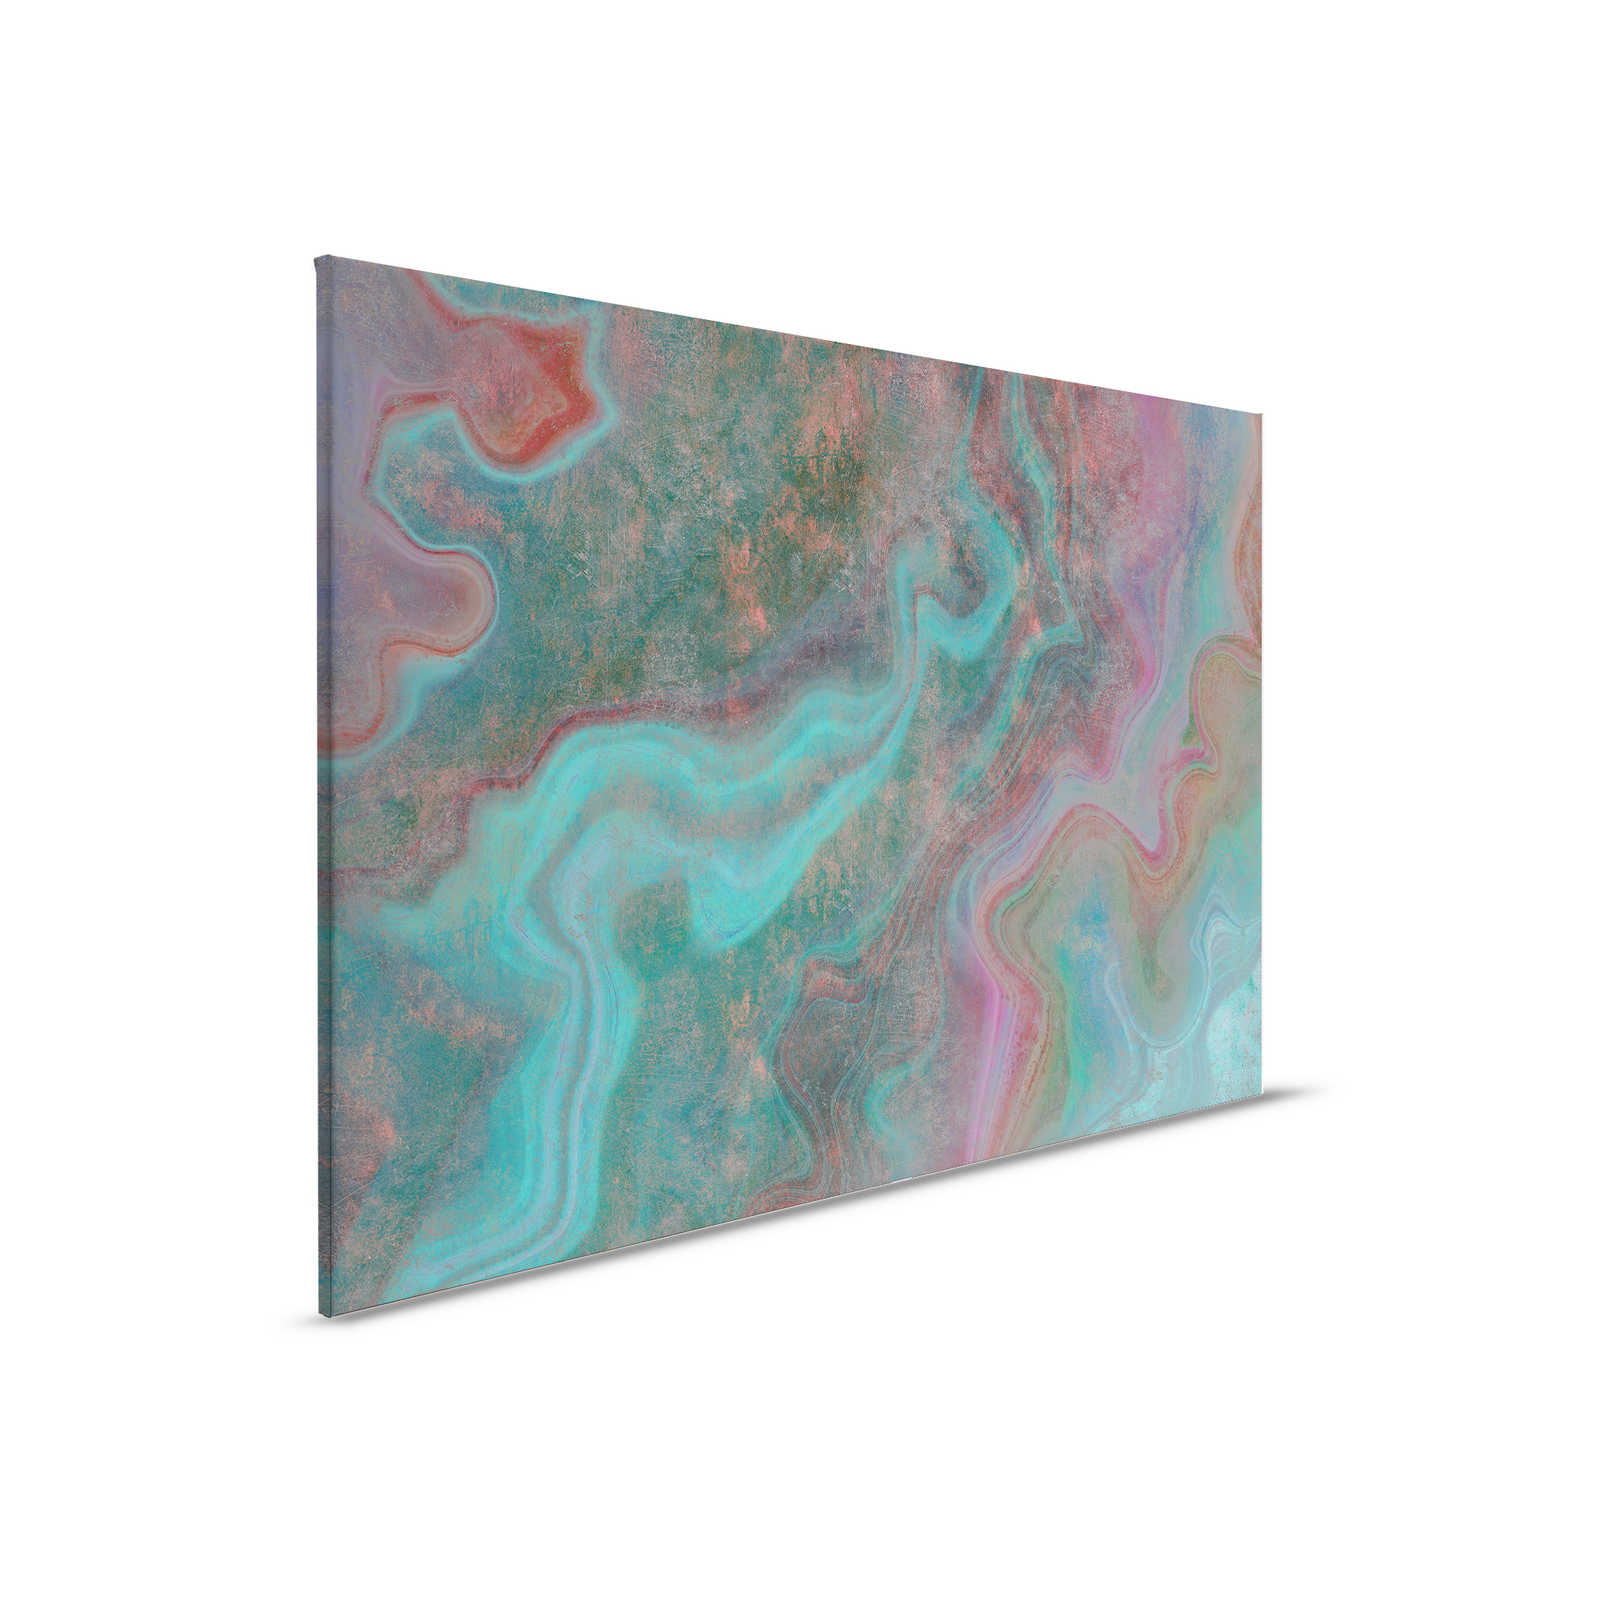         Marble 3 - Canvas painting with scratch structure in colourful marble look as a highlight - 0.90 m x 0.60 m
    